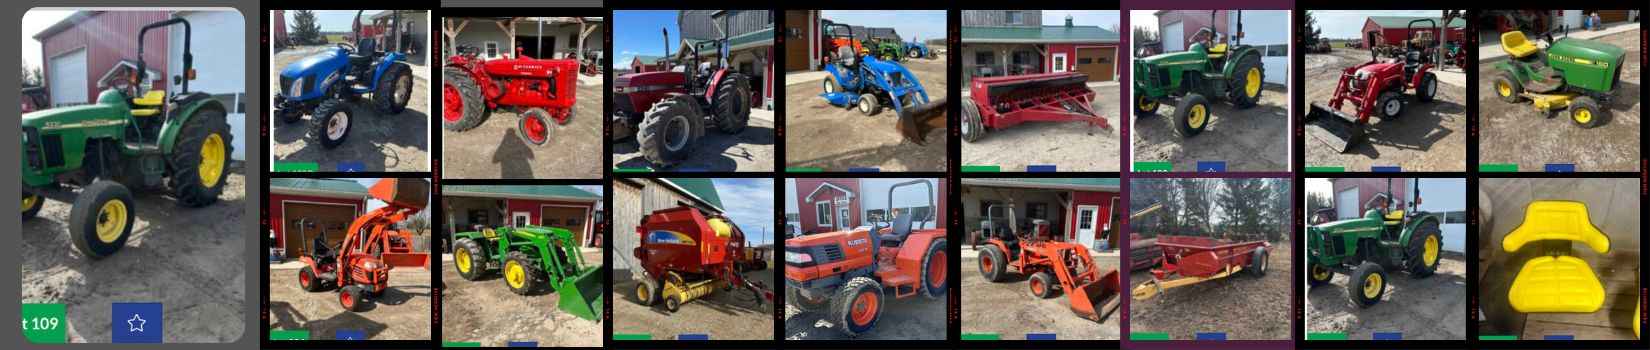 SF Tractor & Equipment Auction